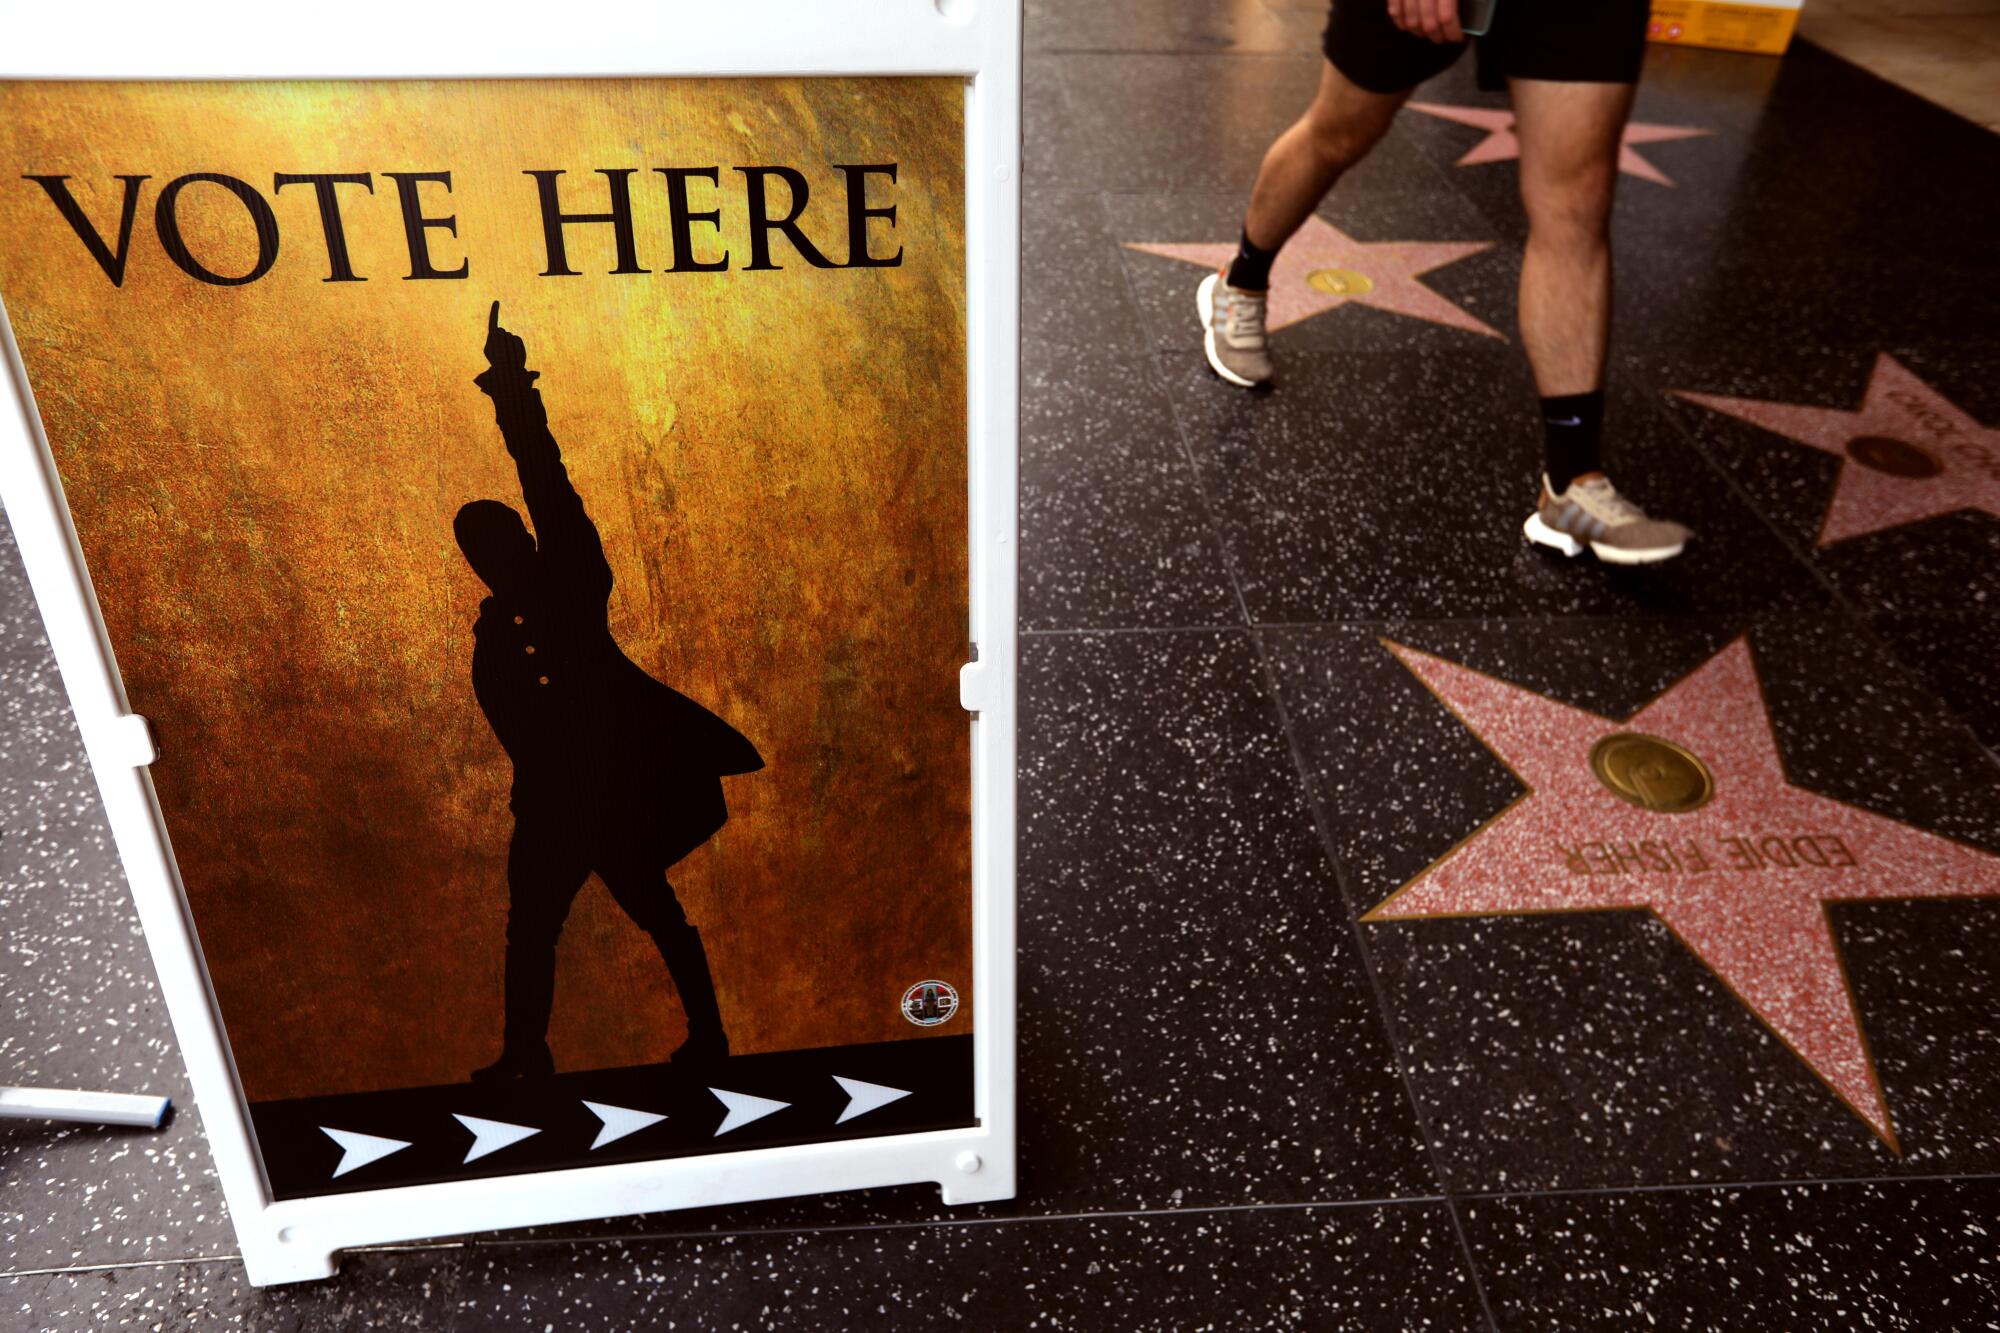 "Vote here" was added to a poster from the musical "Hamilton" to draw in voters to cast their ballots at the Pantages Theatre